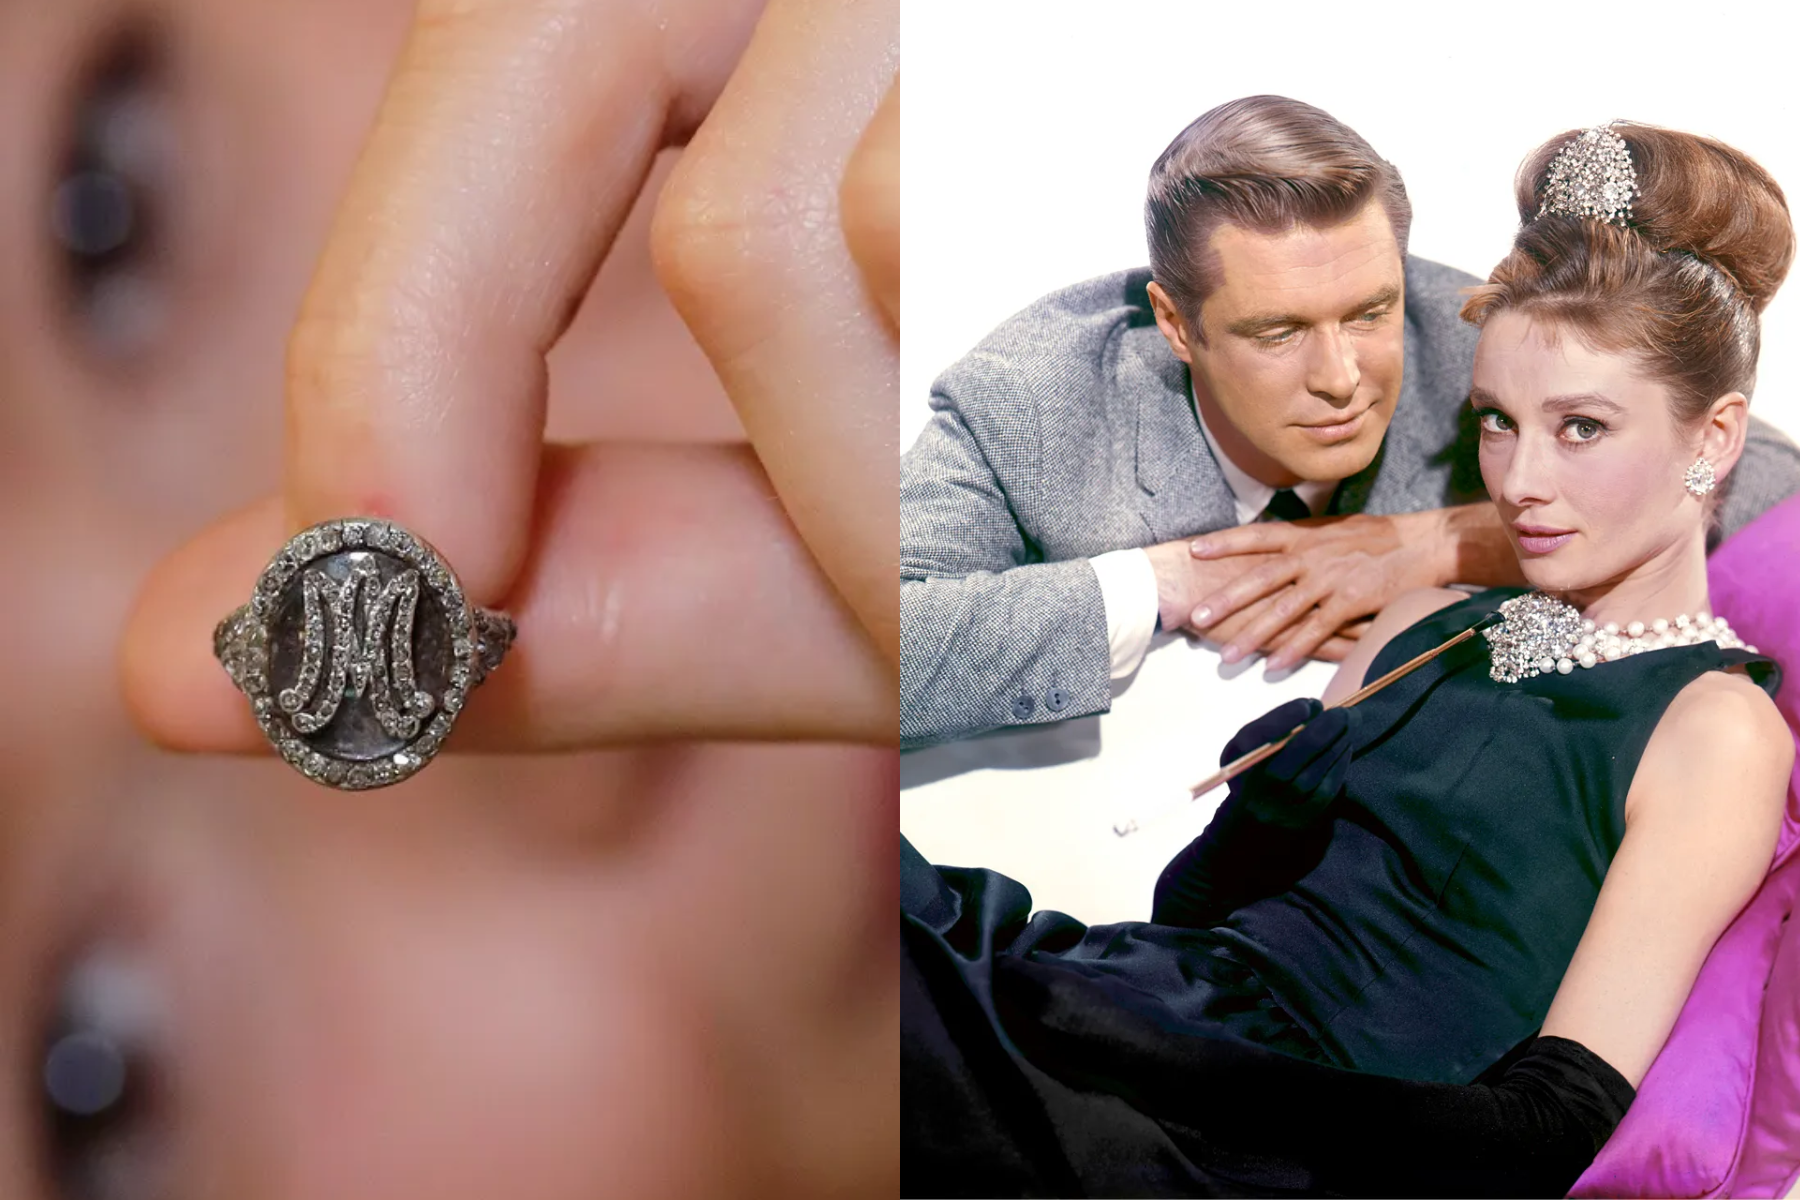 A tiny pinky ring, monogrammed in diamonds and The distinctive diamond, made famous by Audrey Hepburn in the publicity photos for the 1961 film Breakfast at Tiffany's, has a problematic past